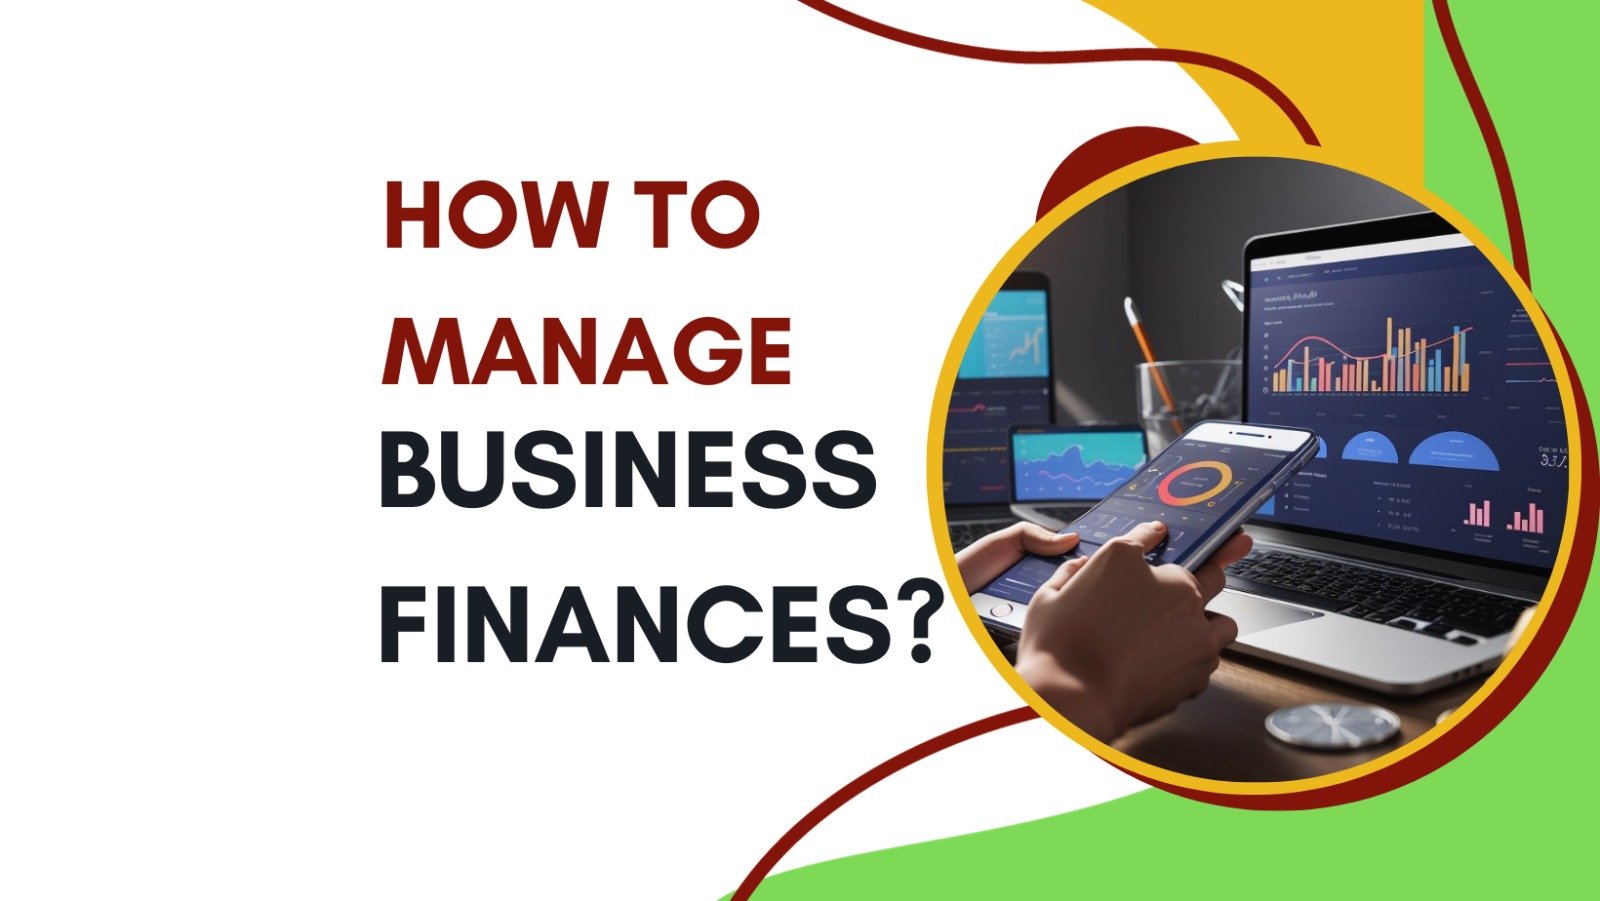 How to Manage Business Finances? #A Guide for Small Business Owners